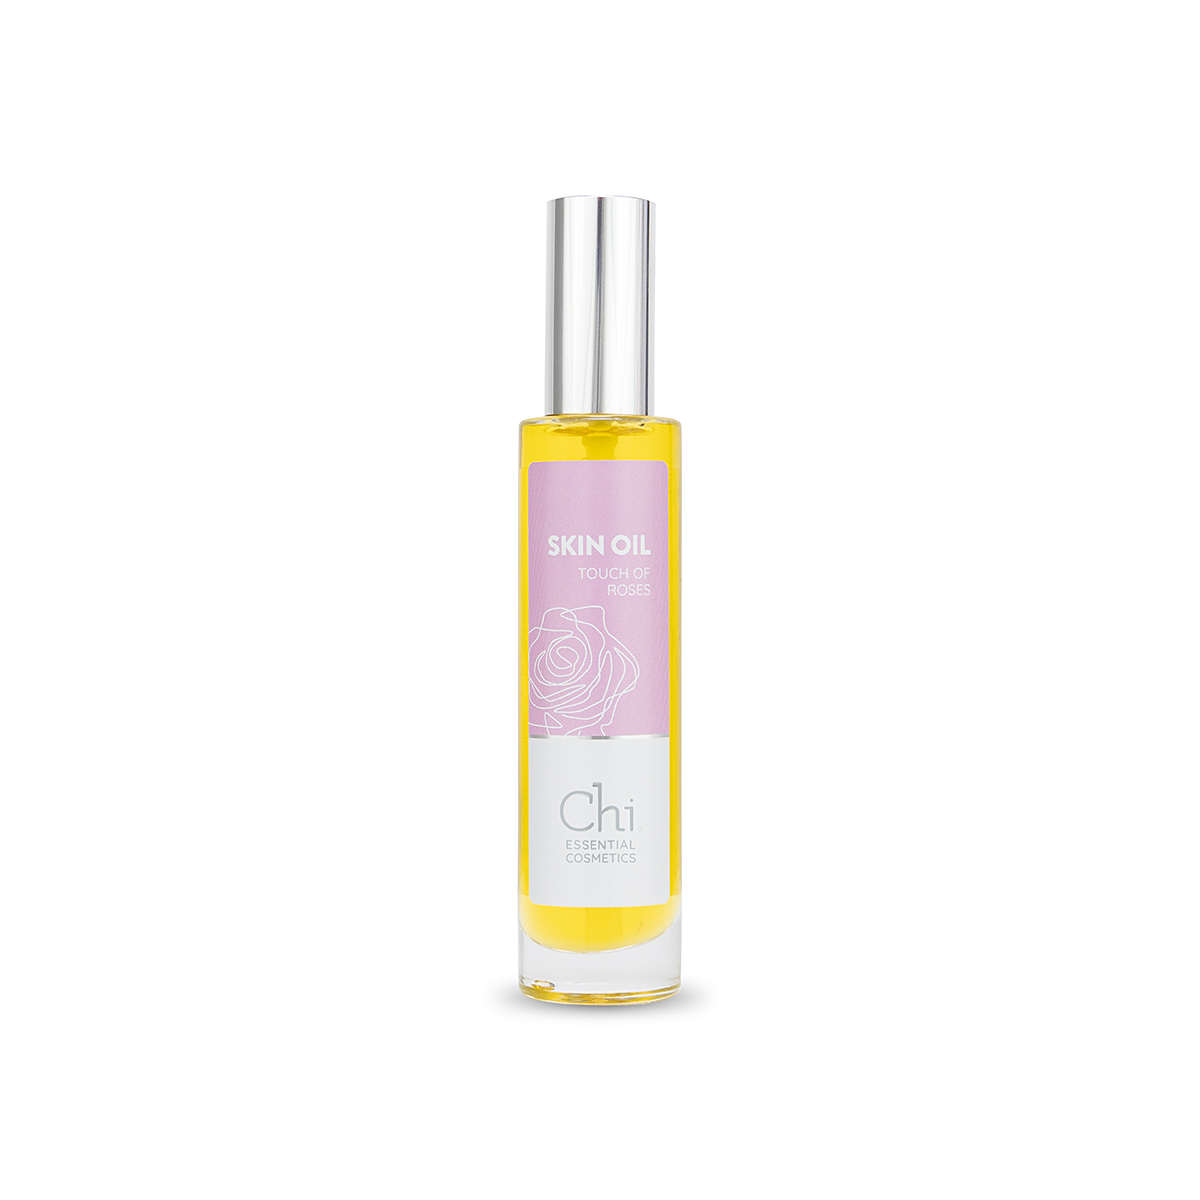 a touch of roses - skin oil